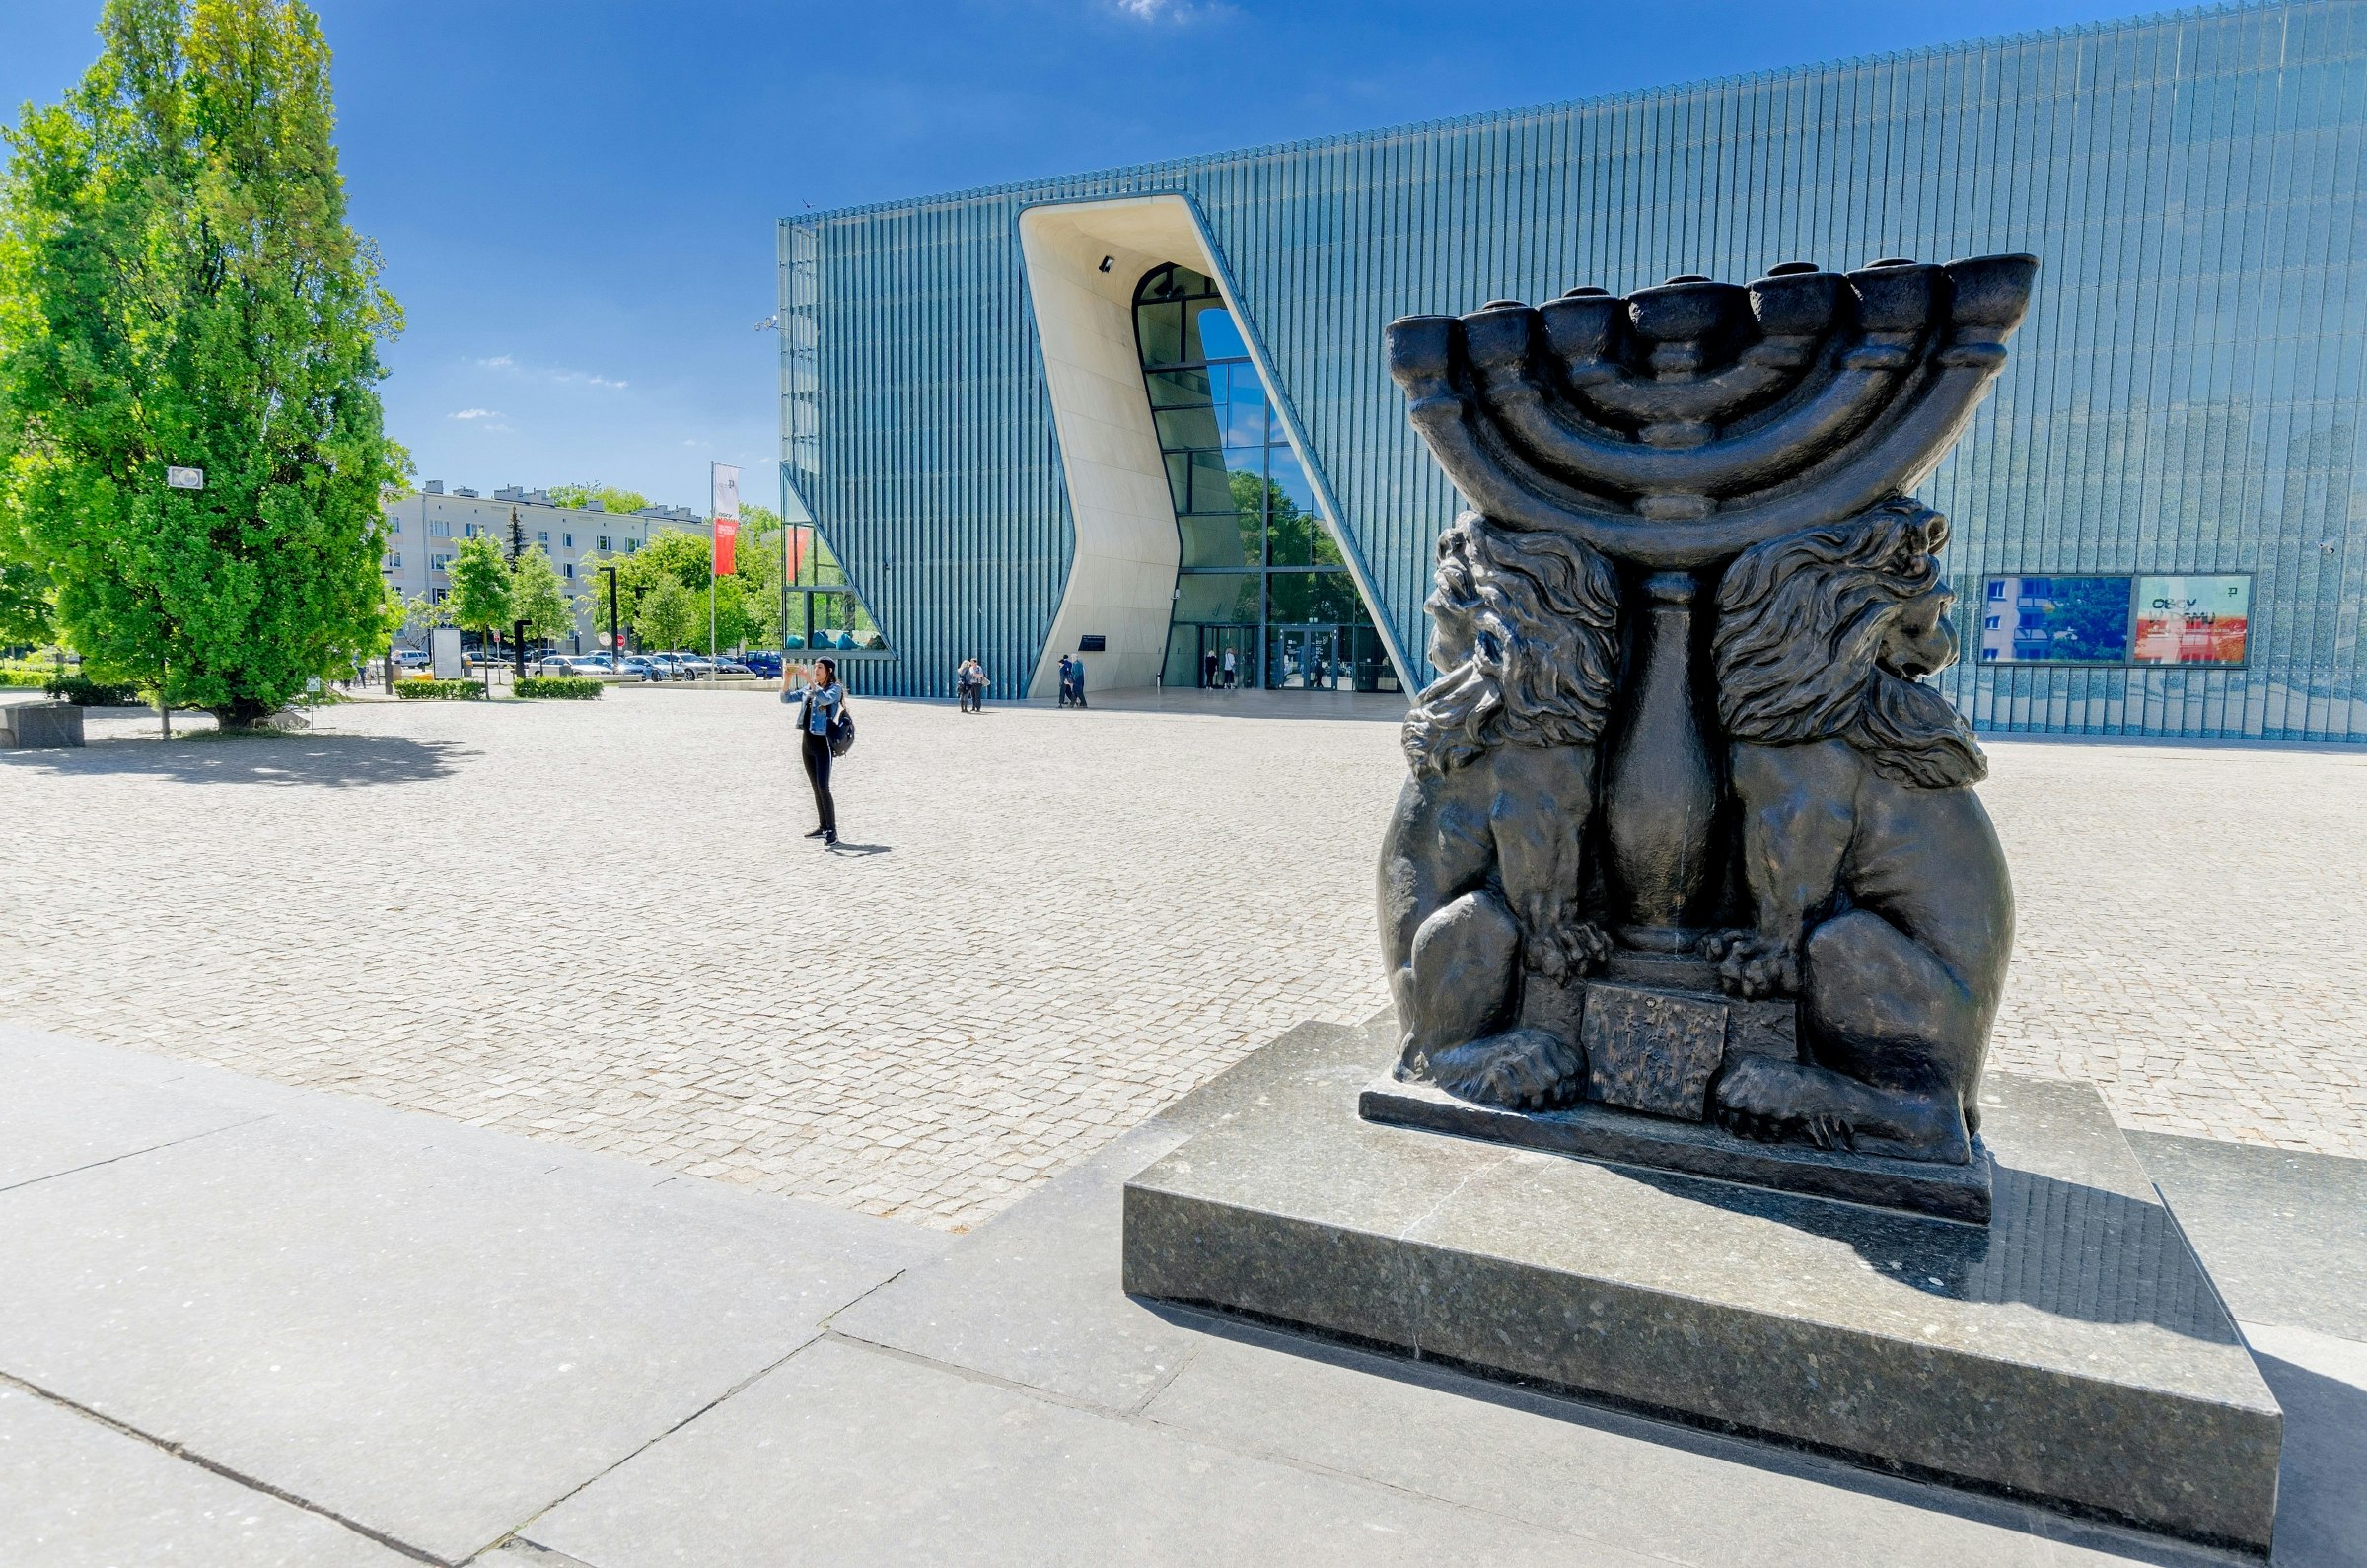 A sculpture of a menorah stands in an open square. A contemporary glass-and-steel museum building stands behind